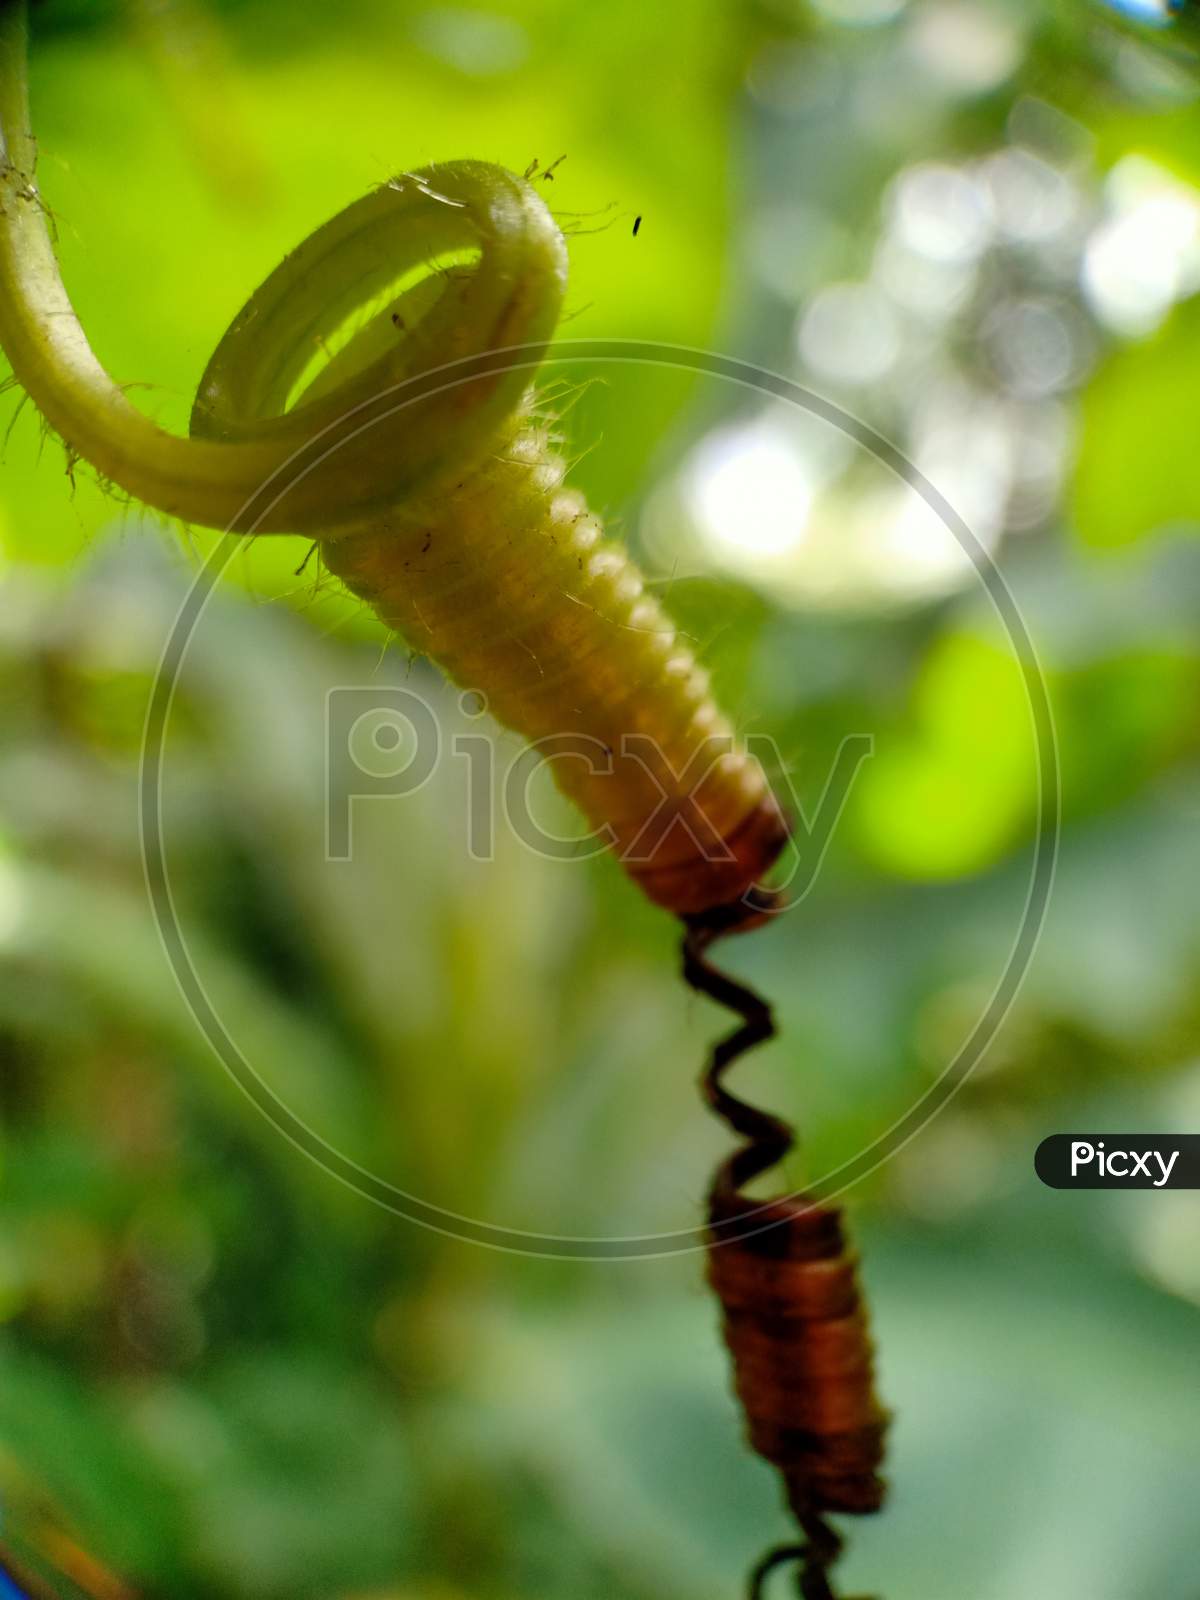 Plant Spiral In Close Up View